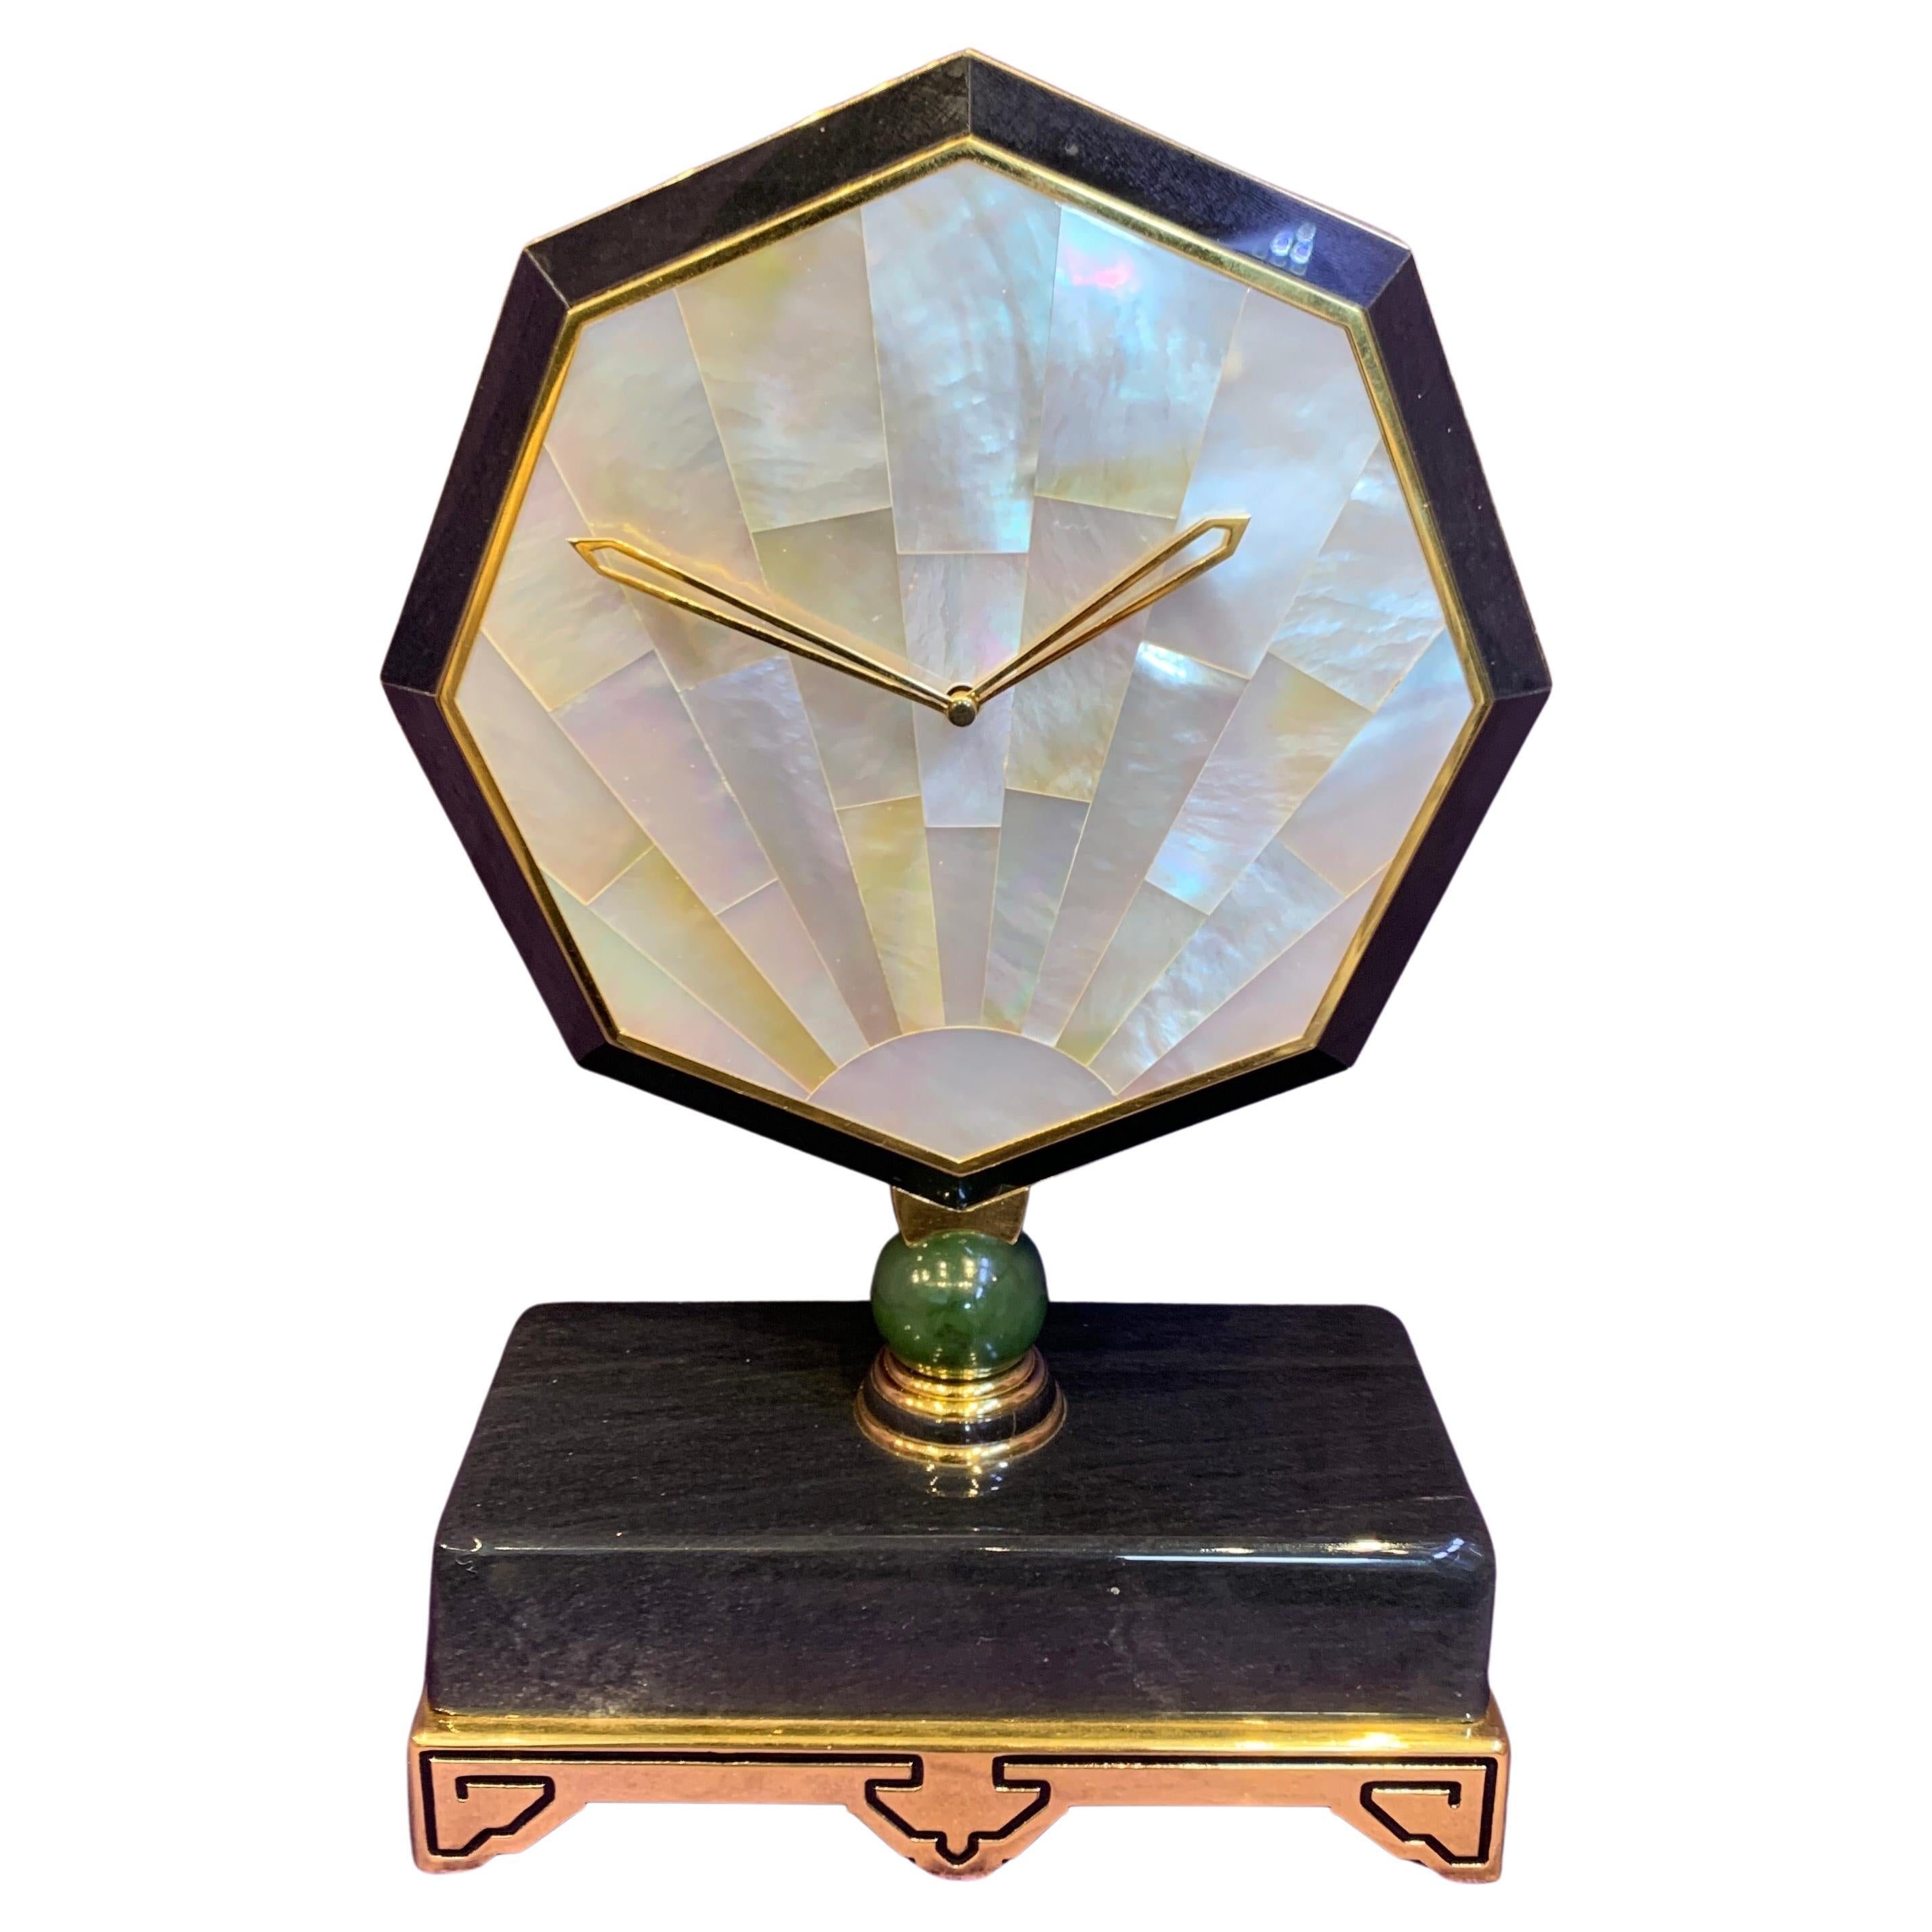 Cartier Onyx & Mother of Pearl Desk Clock

A desk clock consisting of an octagonal face made of mother of pearl, onyx, and gilt brass, with a nephrite bead connecting it to the onyx, gilt brass, and enamel base

Signed Cartier Paris and